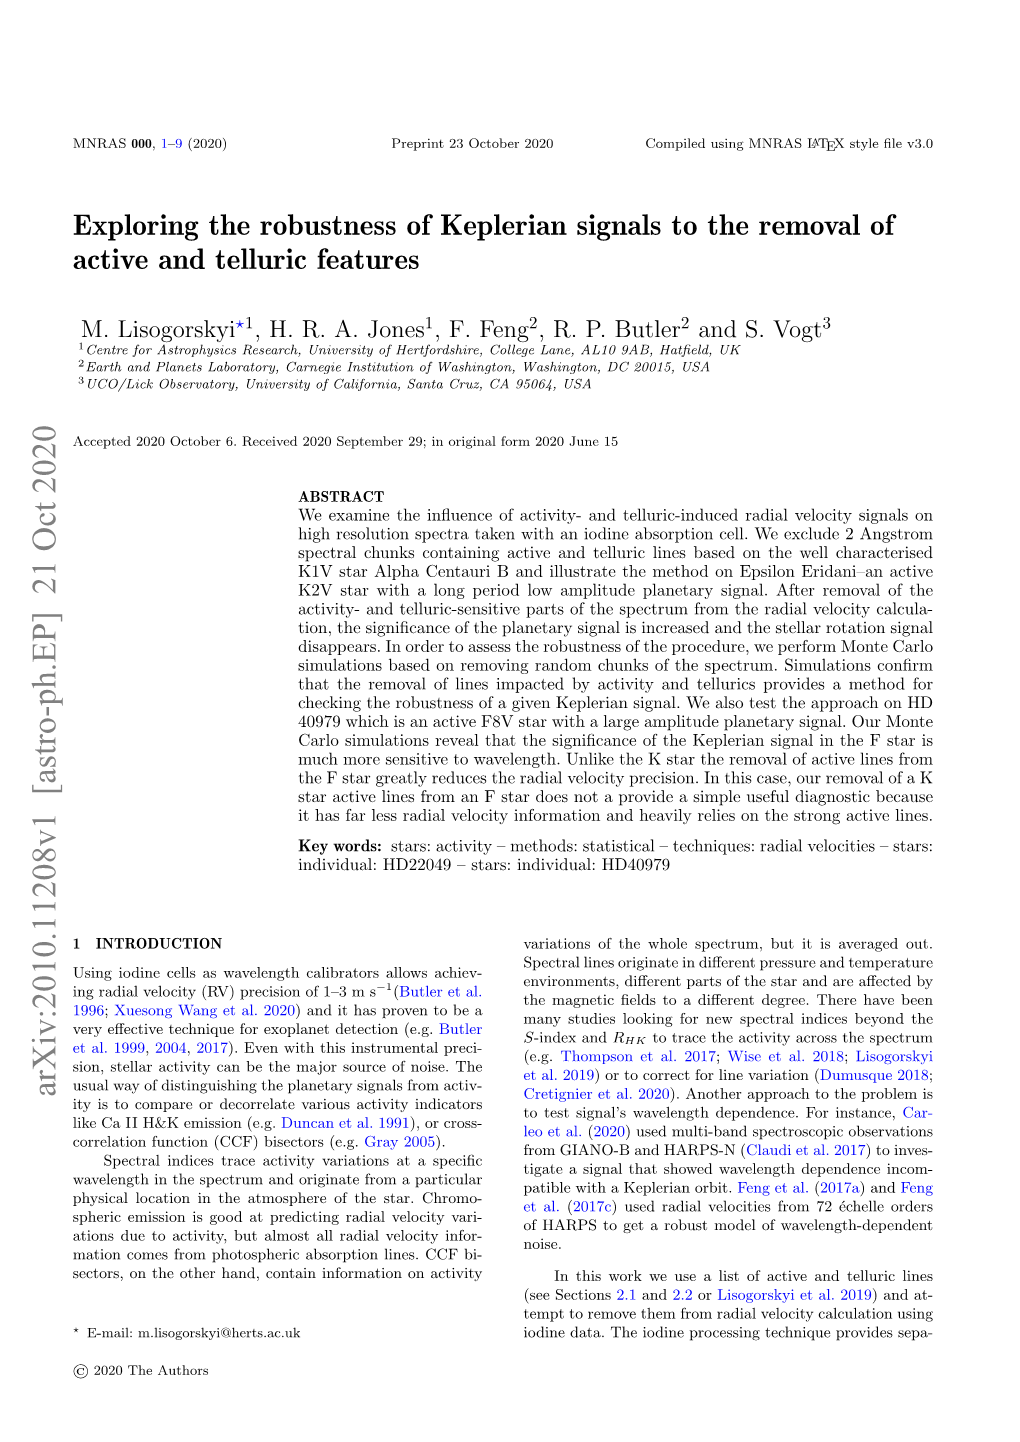 Exploring the Robustness of Keplerian Signals to the Removal of Active and Telluric Features